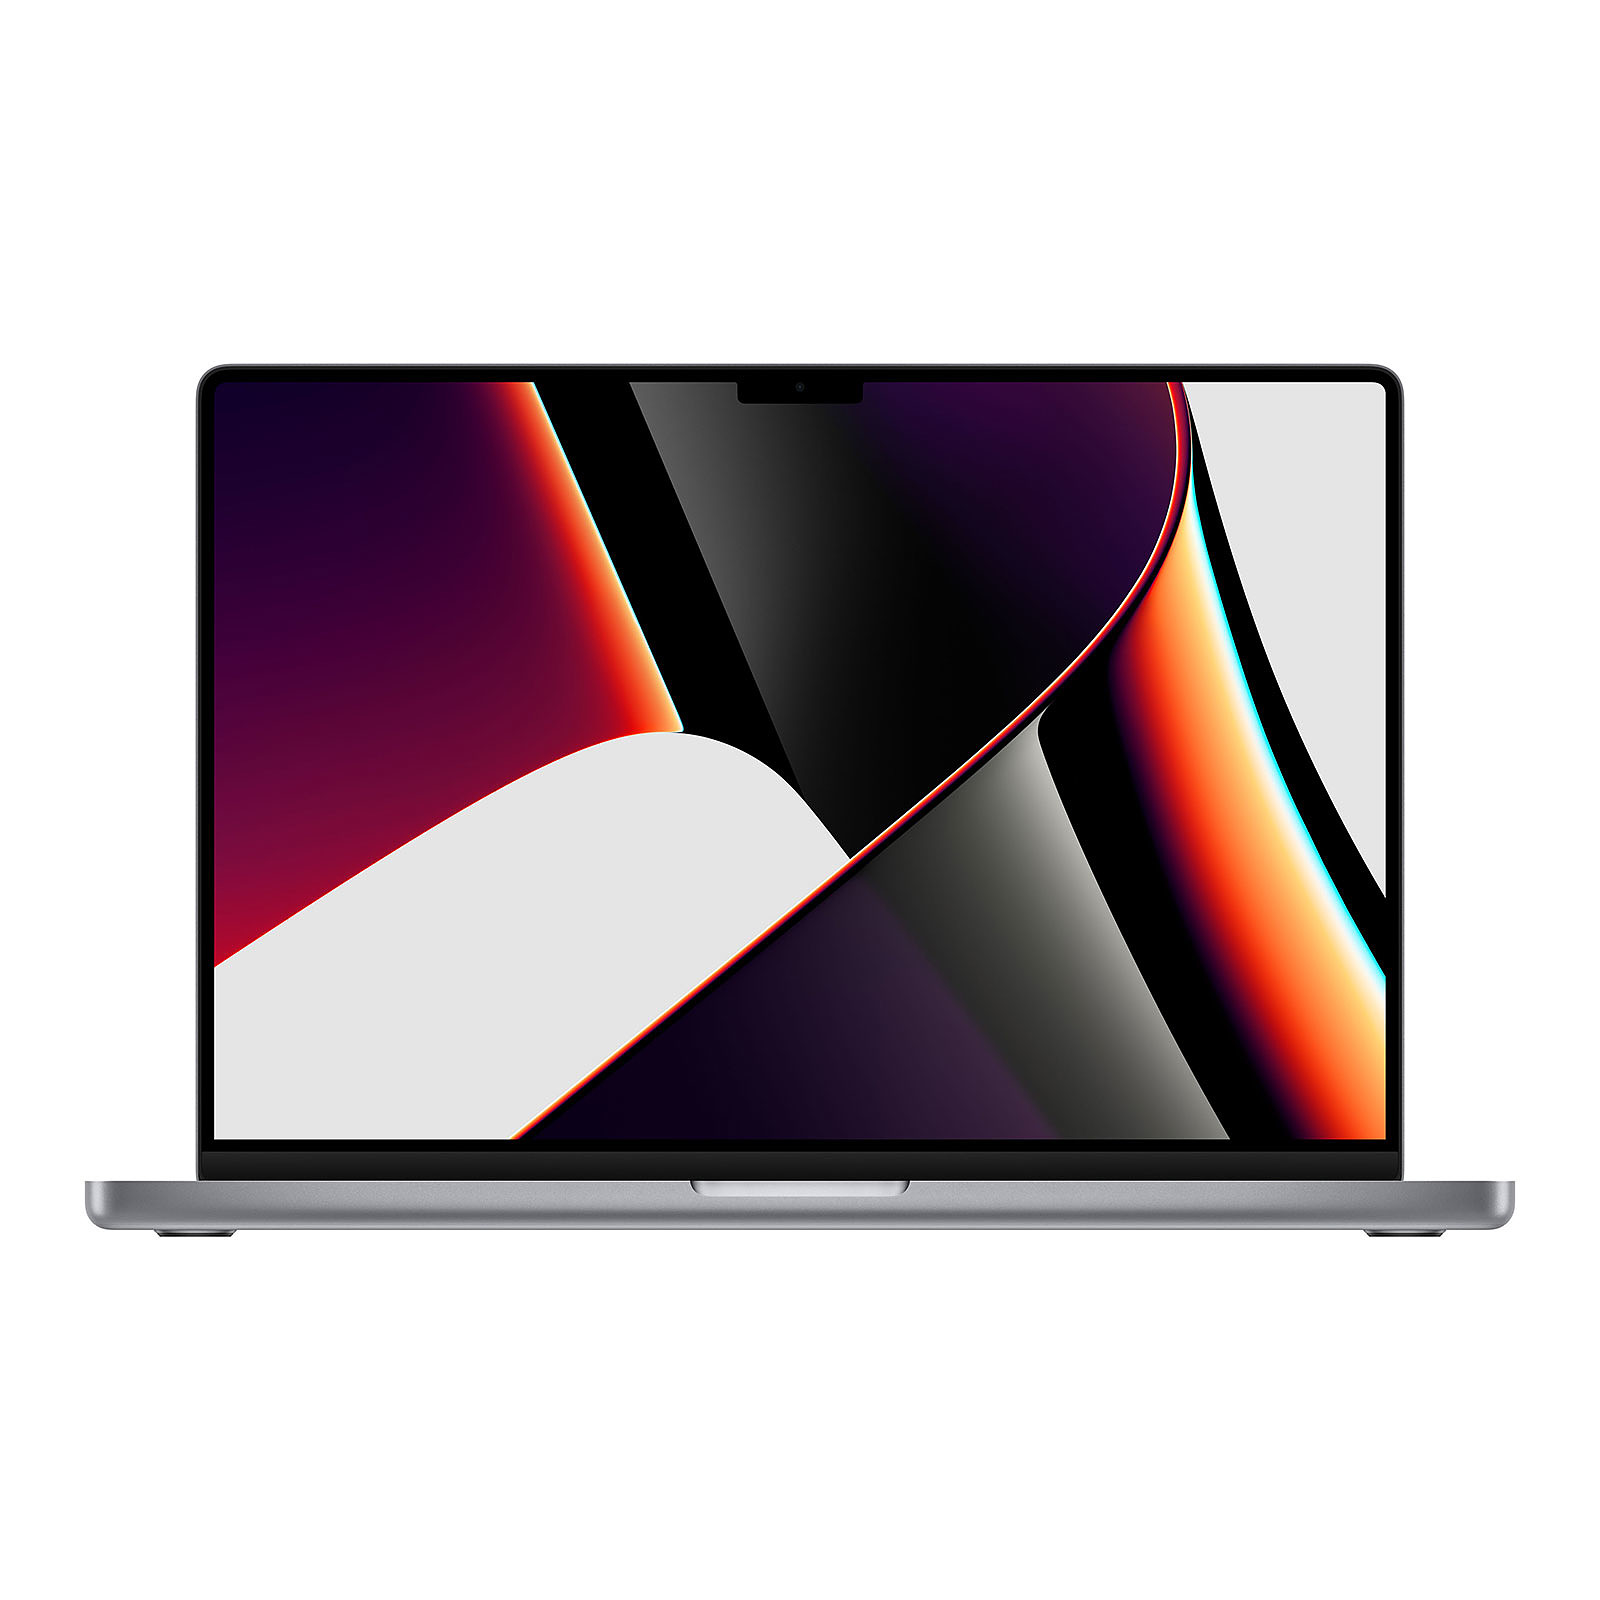 Apple MacBook Pro M1 Max (2021) 16" Gris sideral 64Go/8To (MK1A3FN/A-64GB-8TB) - MacBook Apple